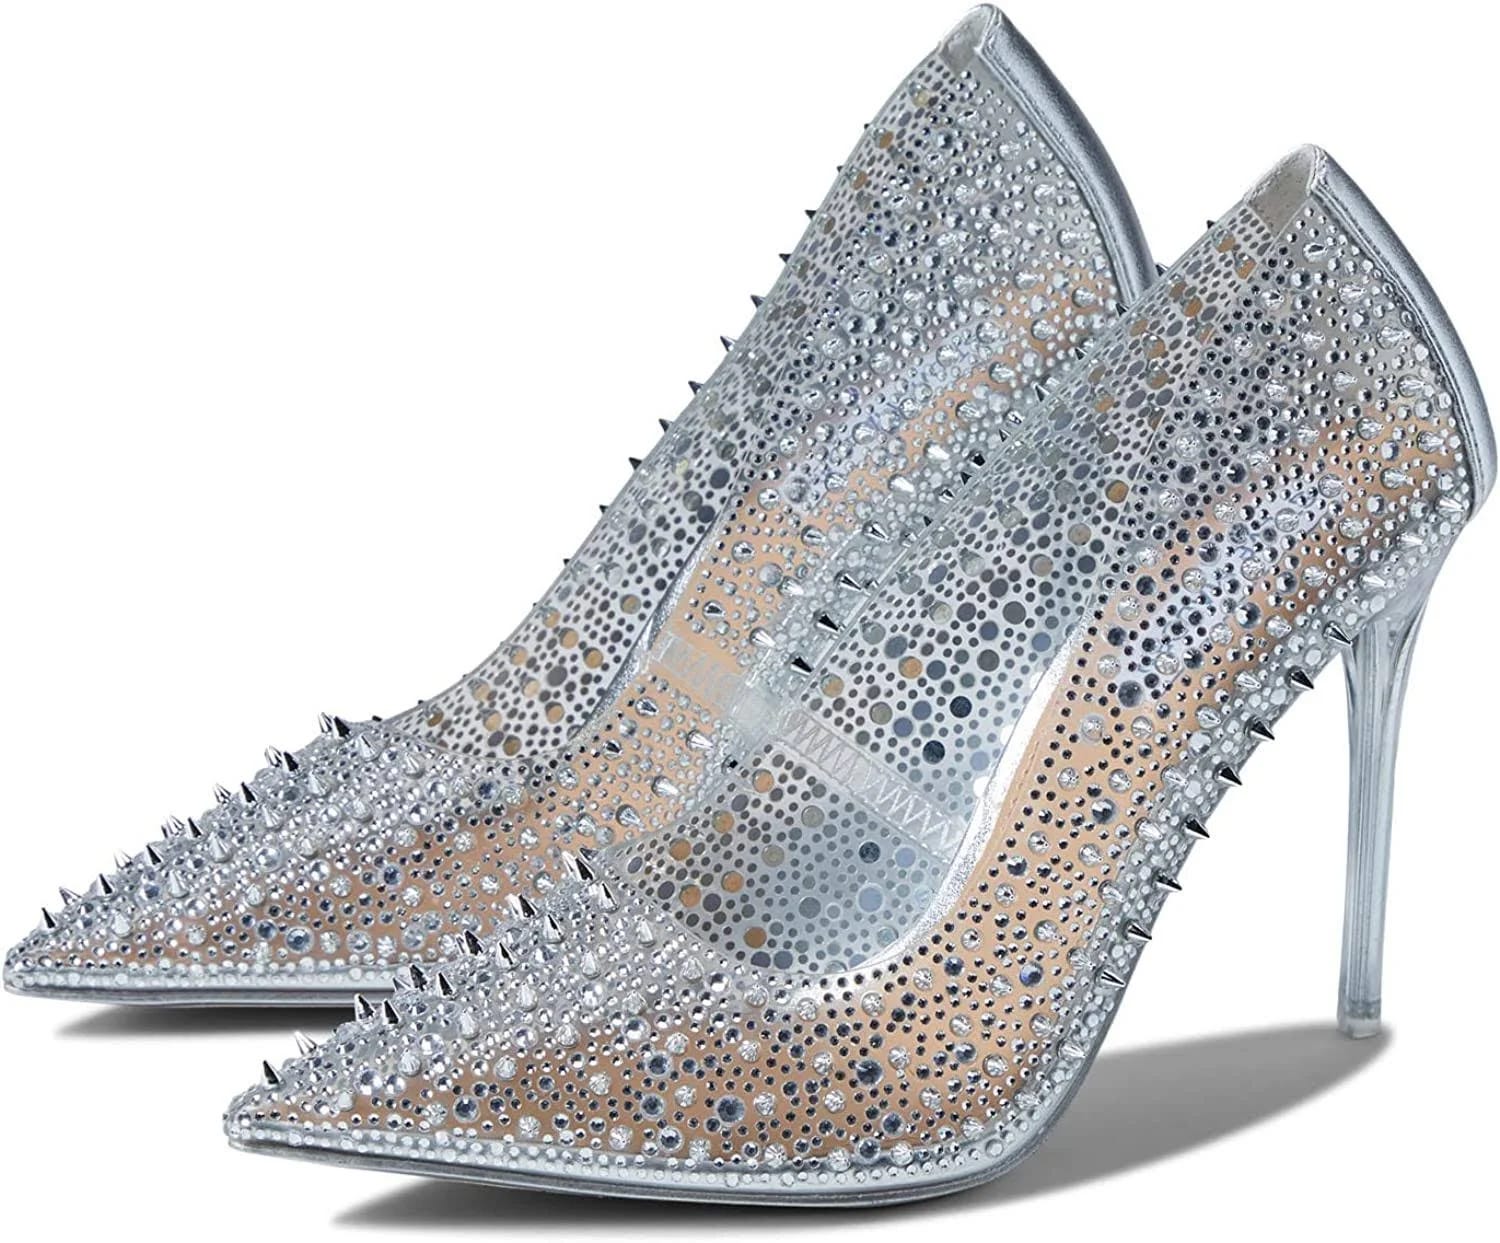 Sparkly Studded Clear Heel Pumps - Stylish and Comfortable | Image